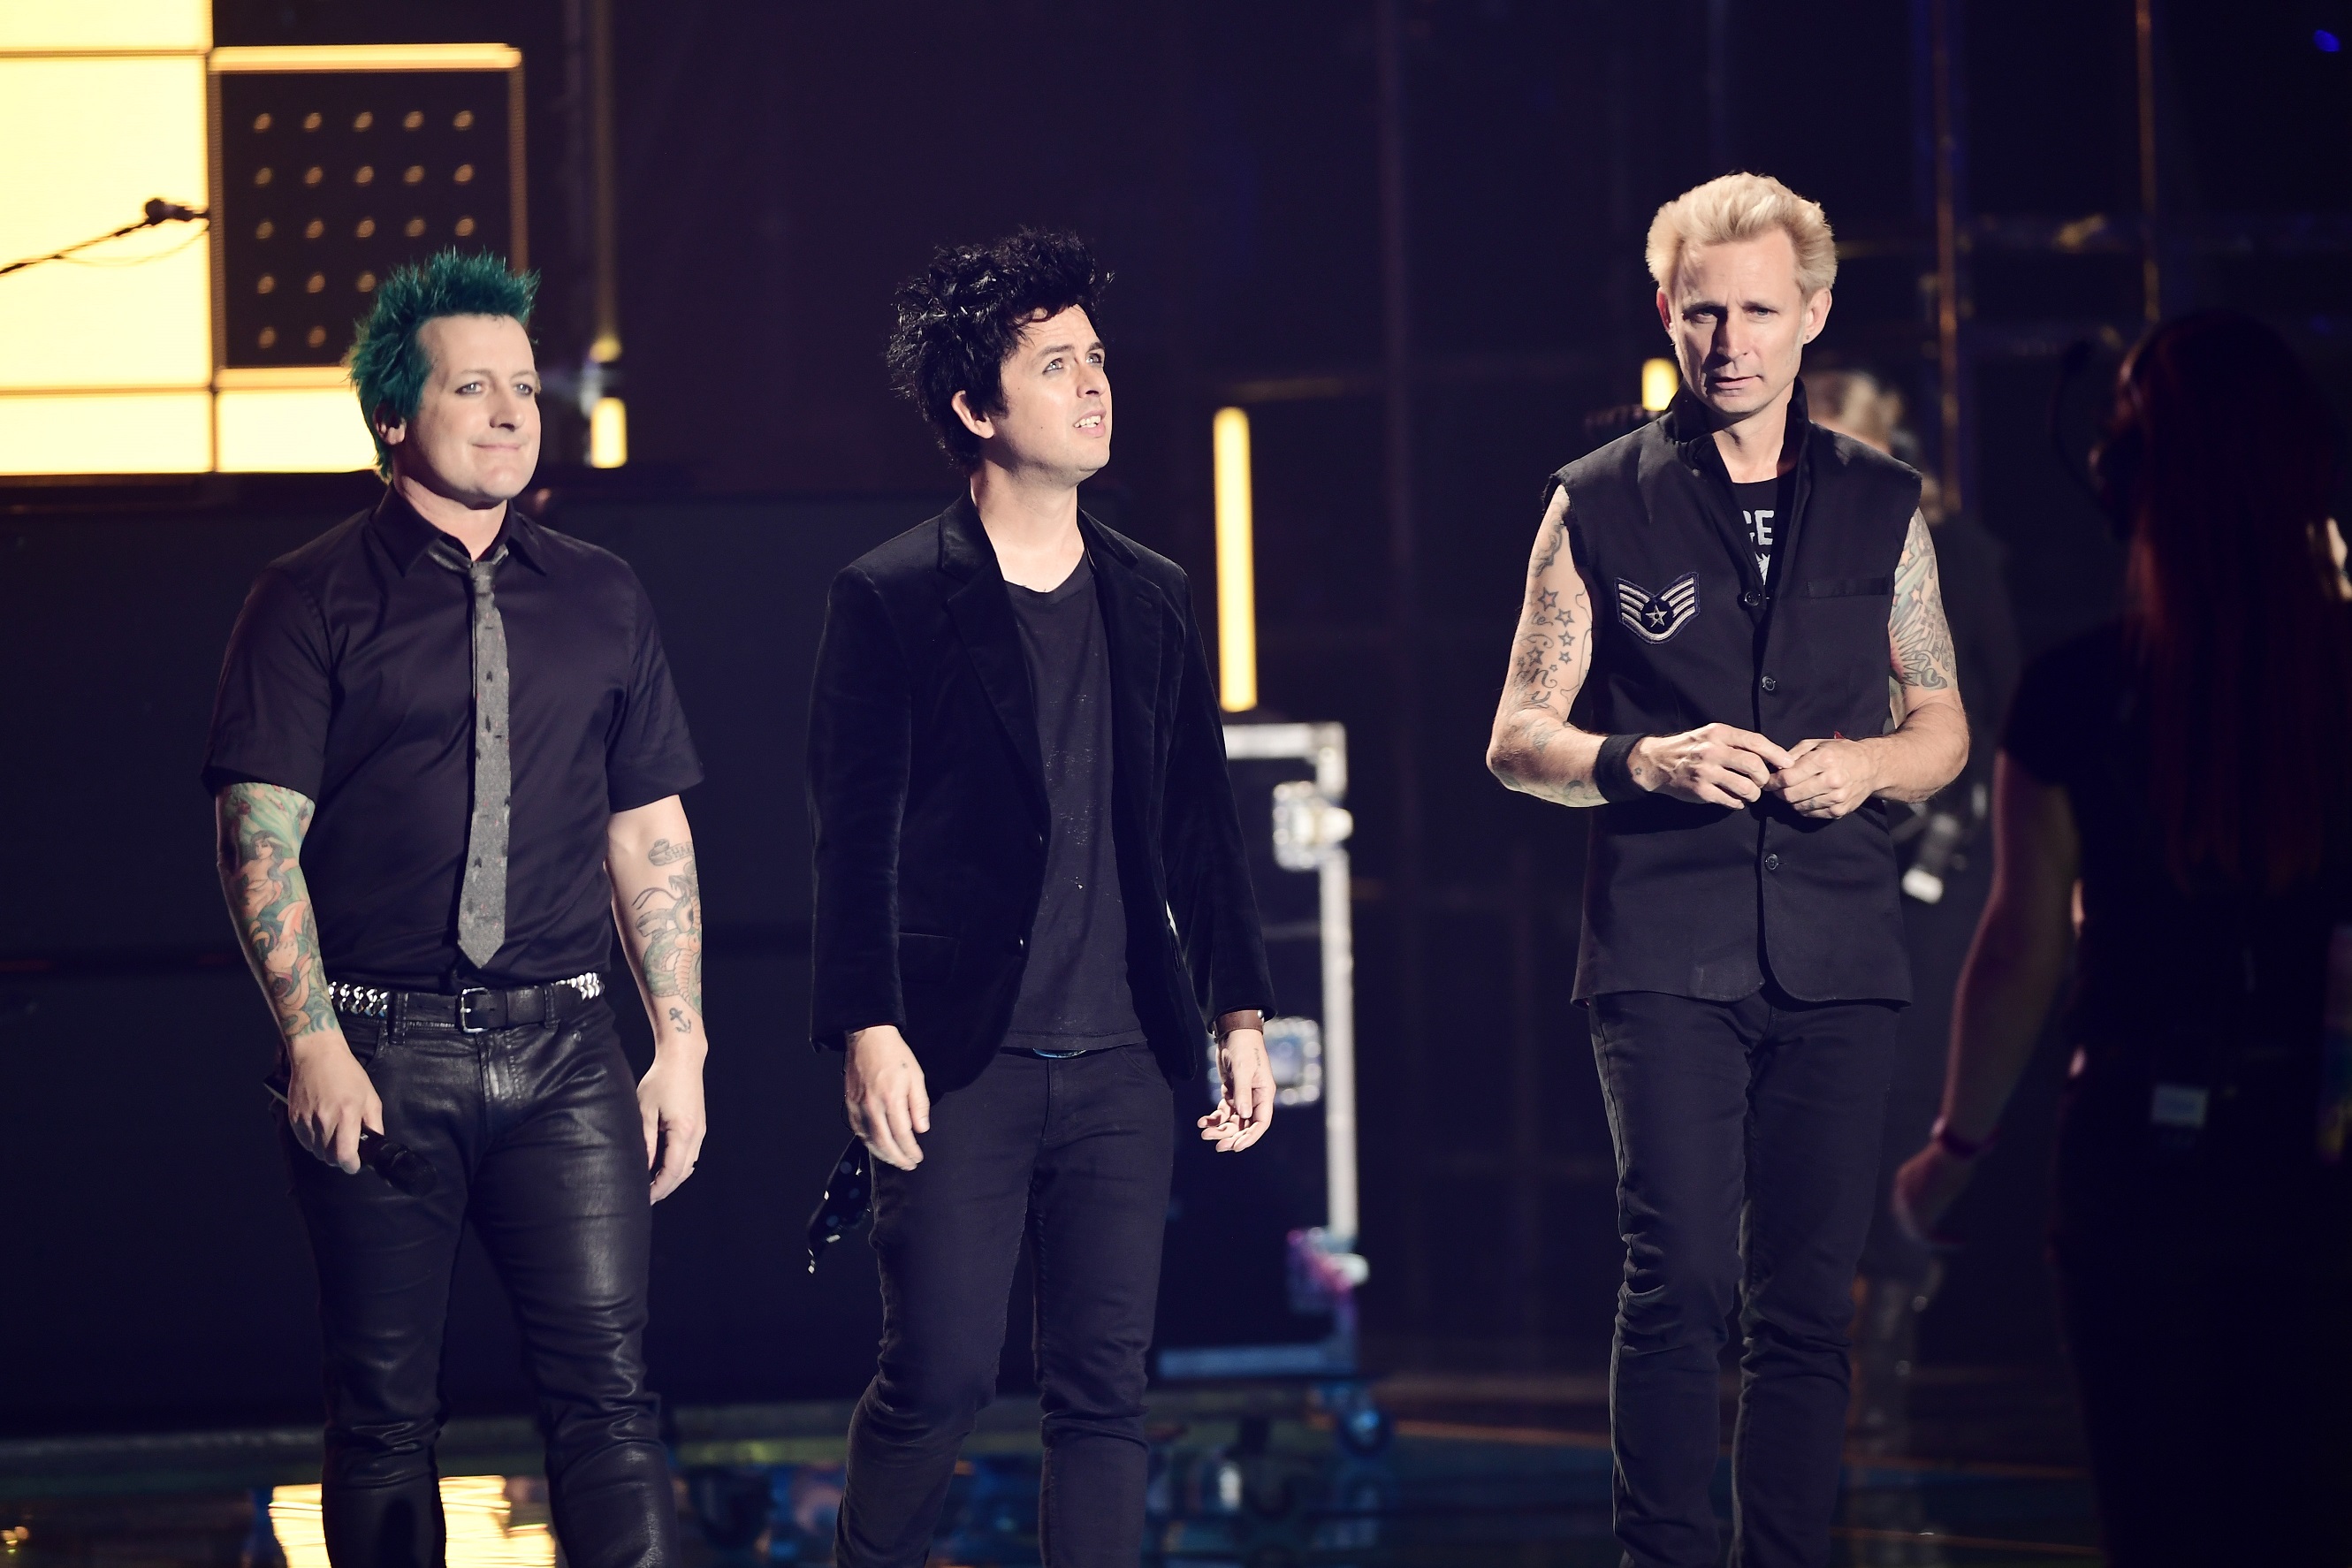 ROTTERDAM, NETHERLANDS - NOVEMBER 06: Idris Elba (not pictured) presents the Global Icon award to Tre Cool, Billie Joe Armstrong and Mike Dirnt of Green Day on stage at the MTV Europe Music Awards 2016 on November 6, 2016 in Rotterdam, Netherlands. (Photo by Ian Gavan/Getty Images for MTV)